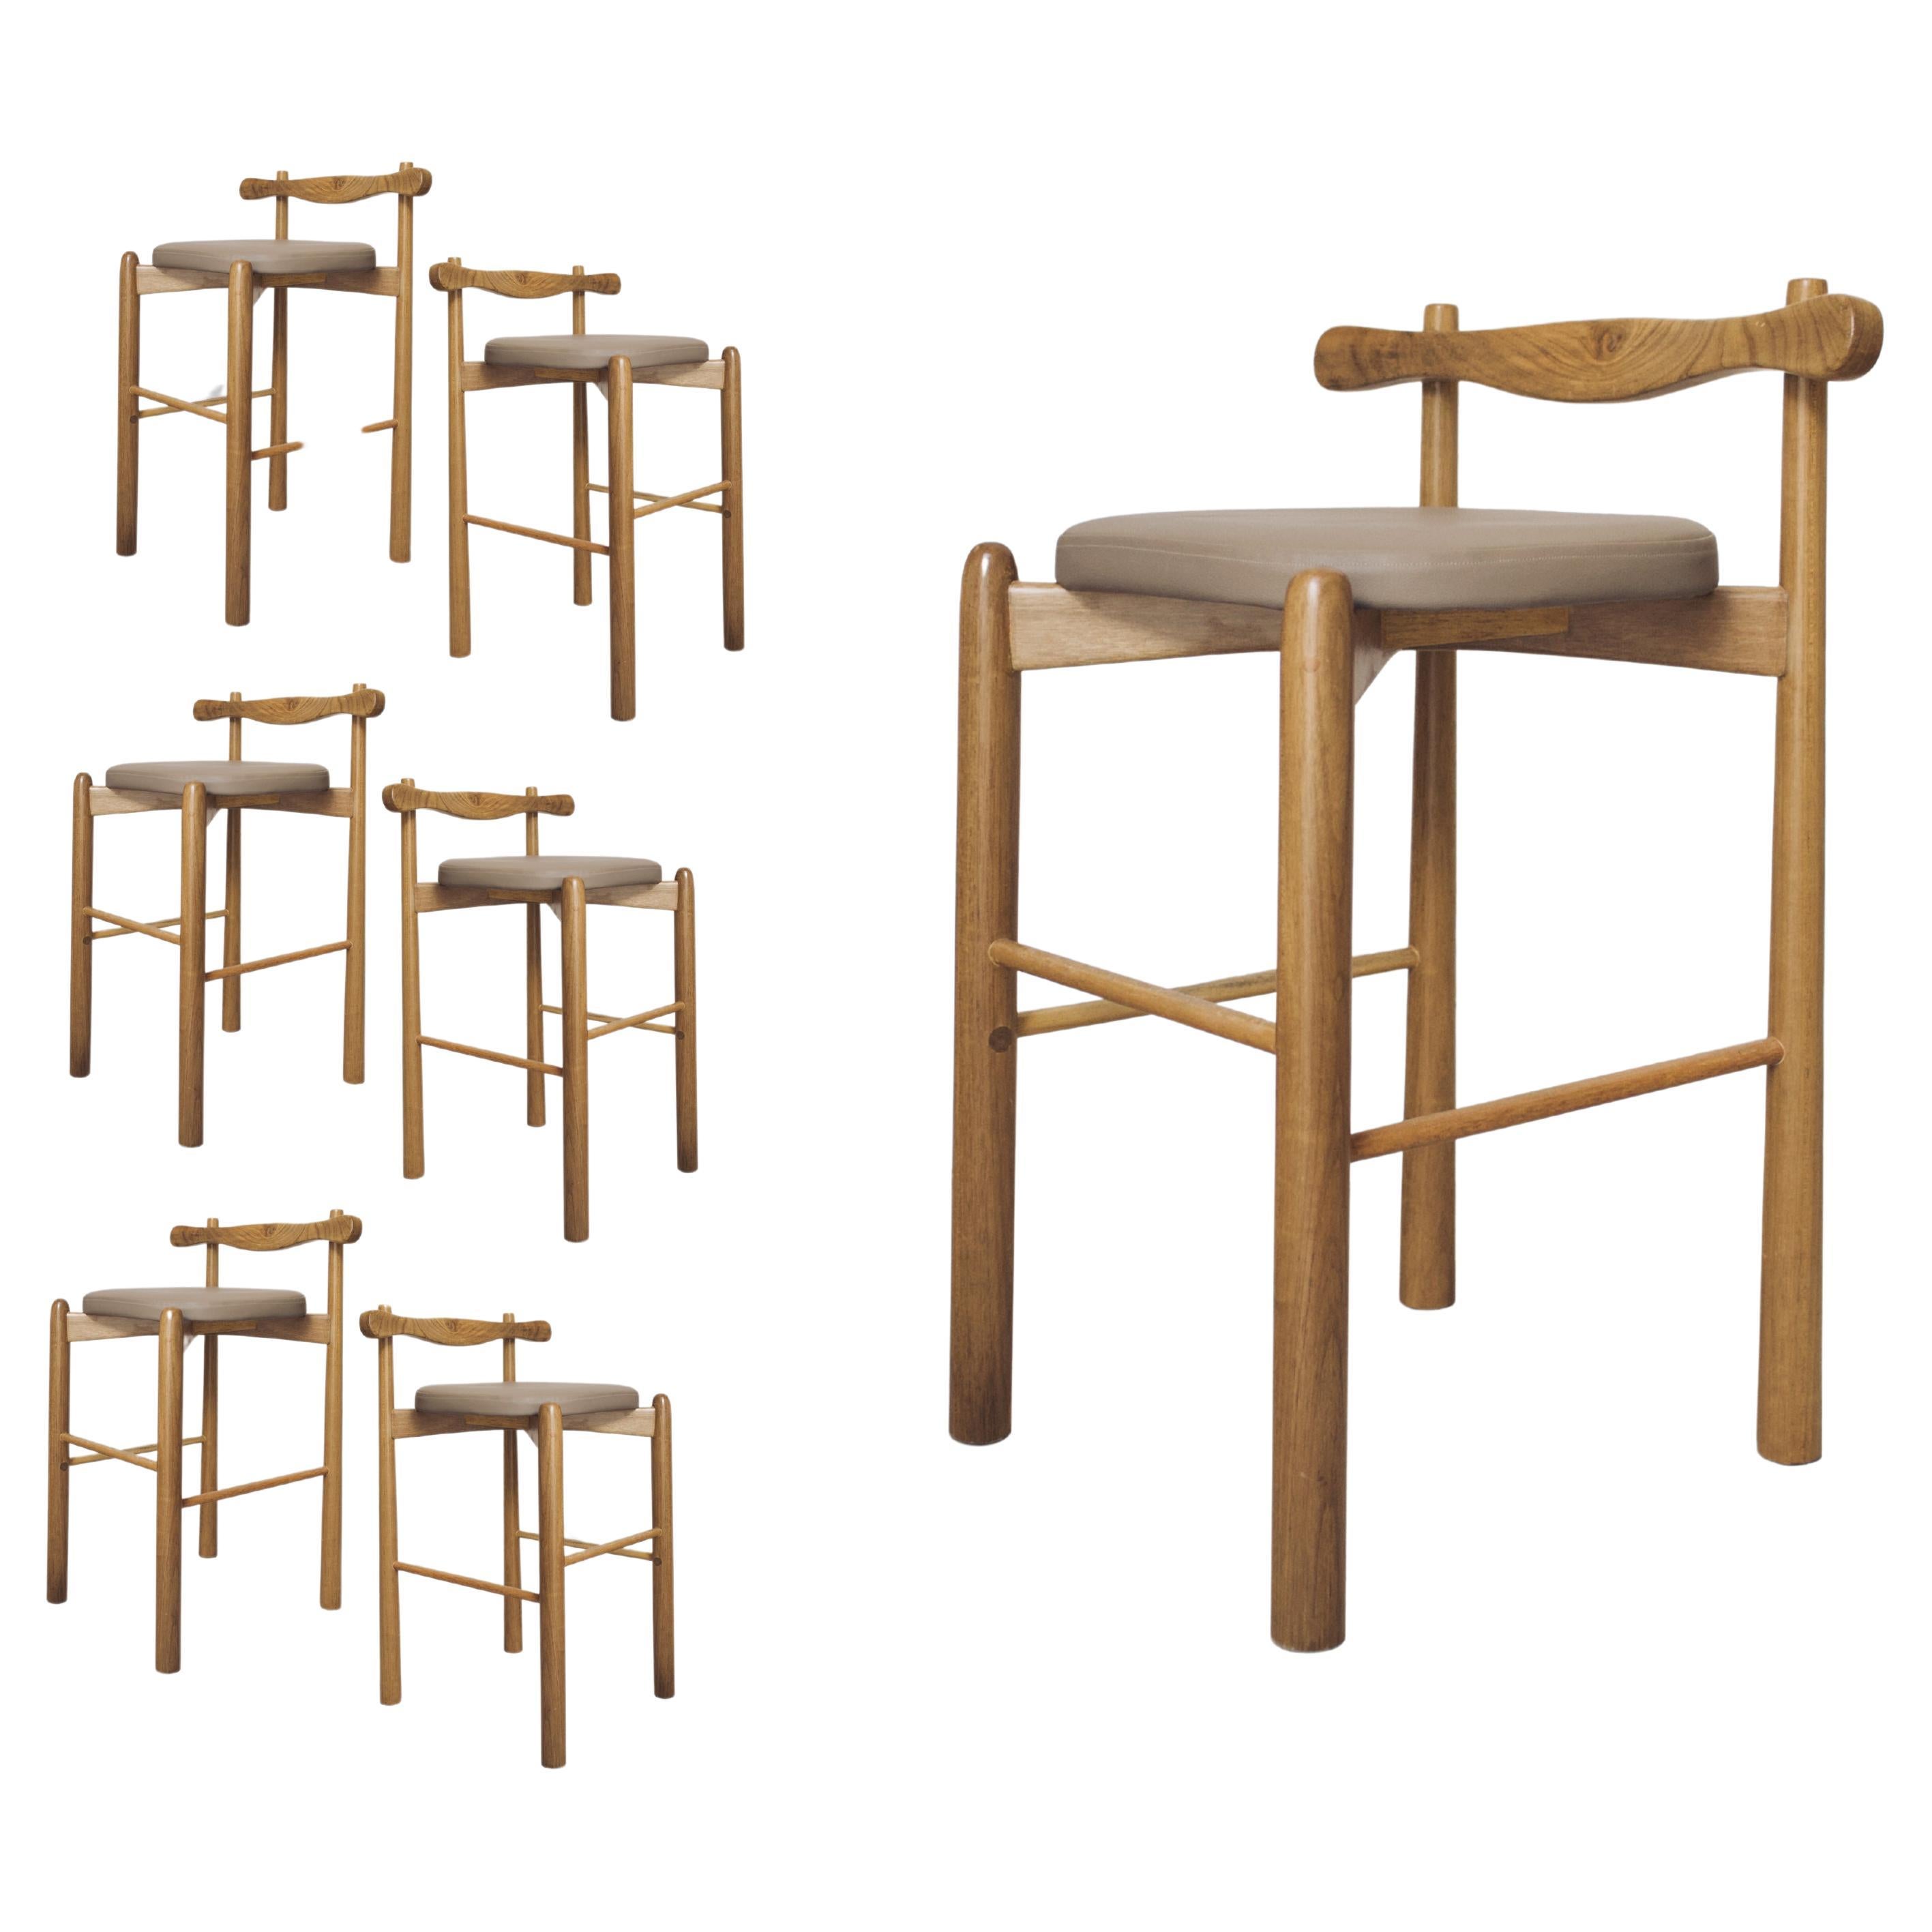 Set of 6 Counter Stools Uçá - Brown Light Brown Finish Wood (fabric ref : F04)